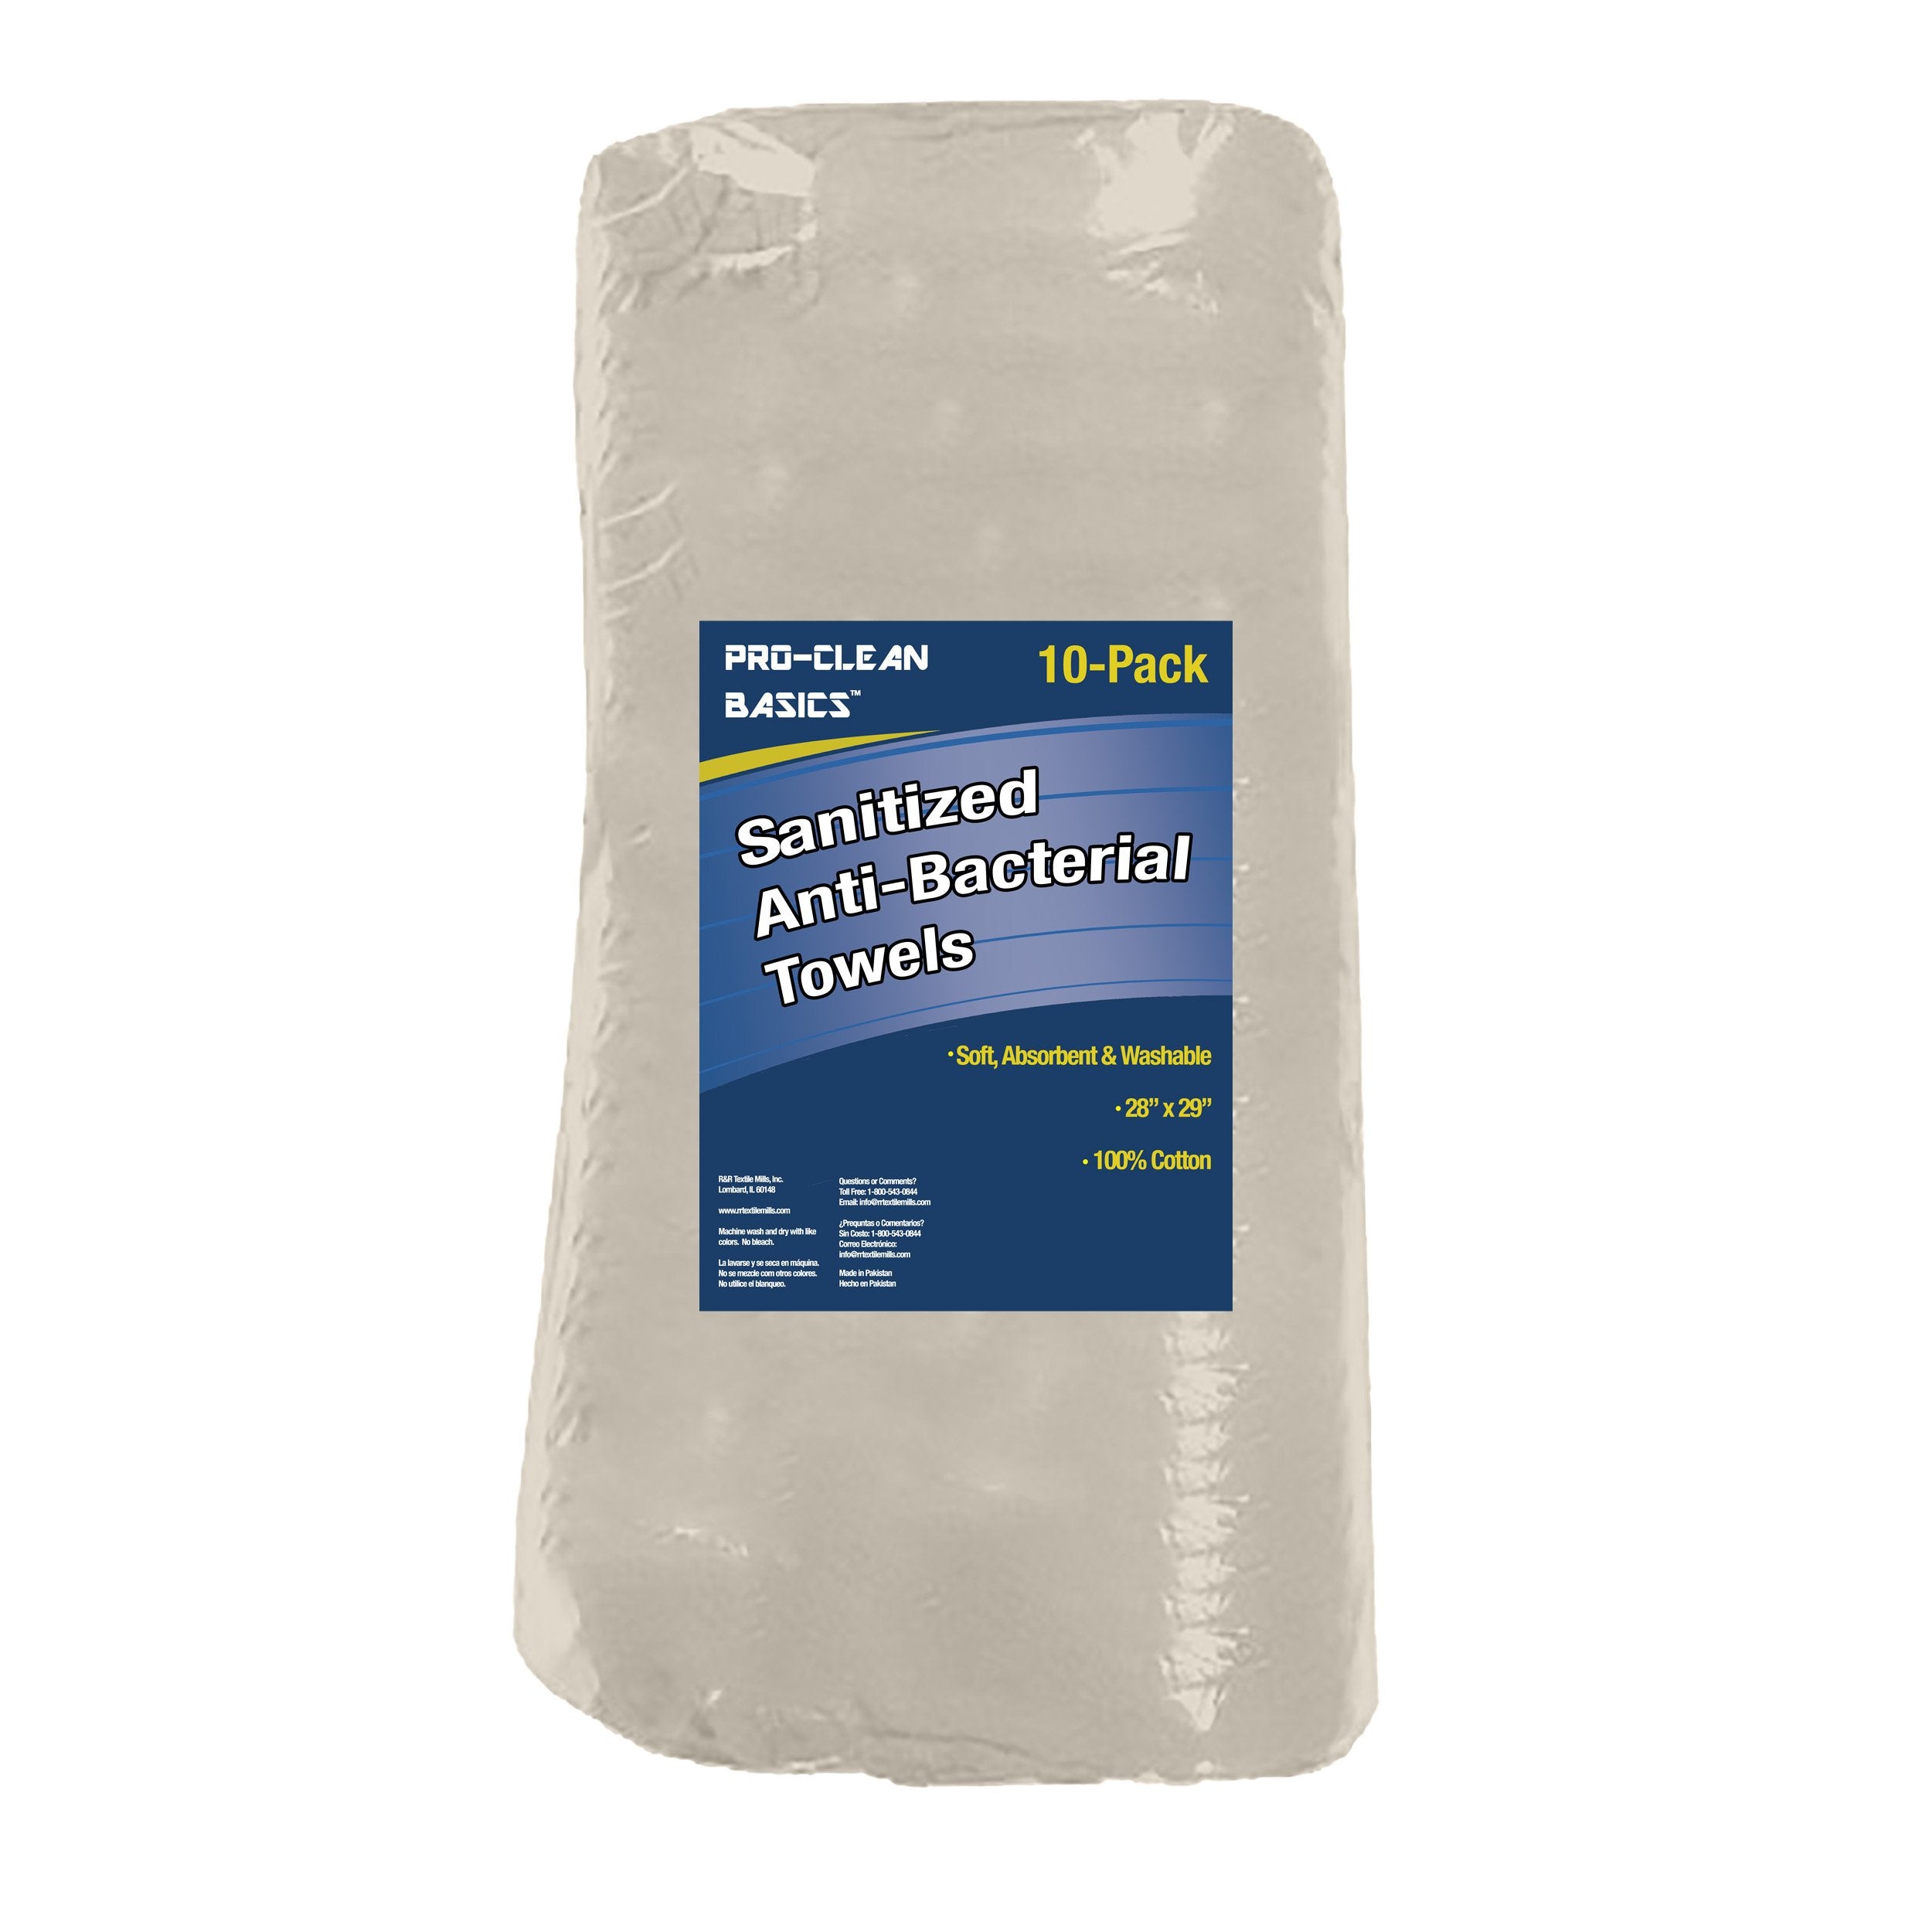 Pro-Clean Basics: Sanitized Anti-Bacterial Beige Wiping Towel, 28in x 29in